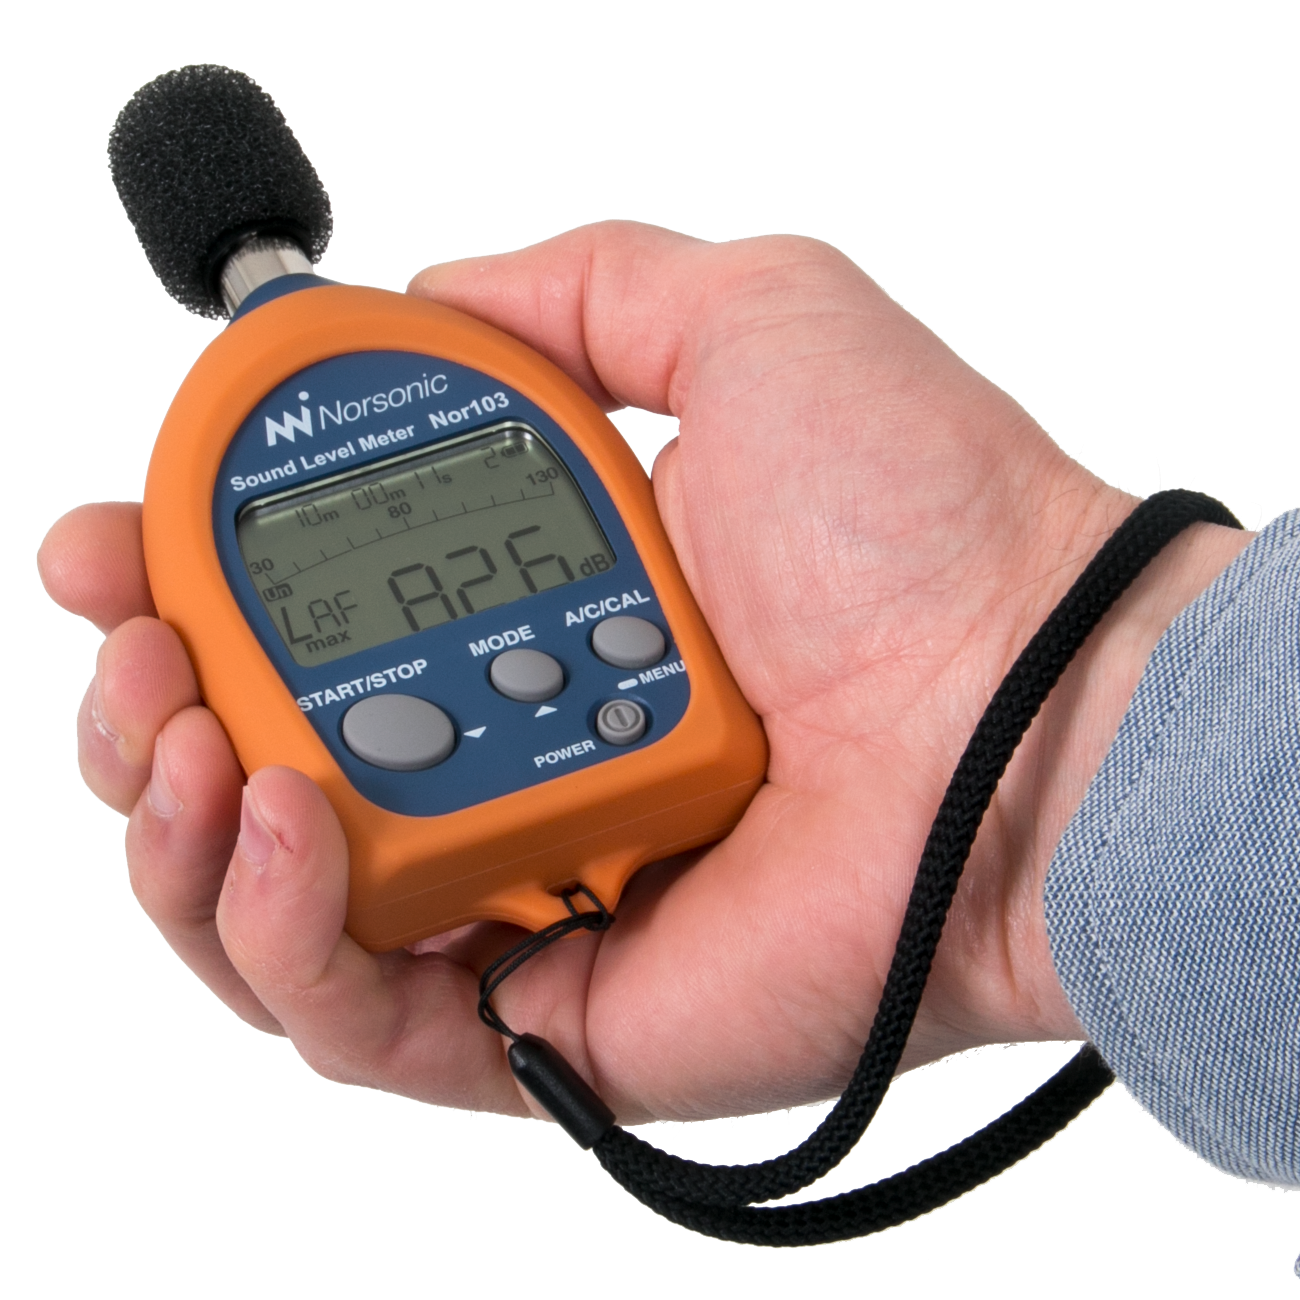 Nor103 sound level meter with orange cover